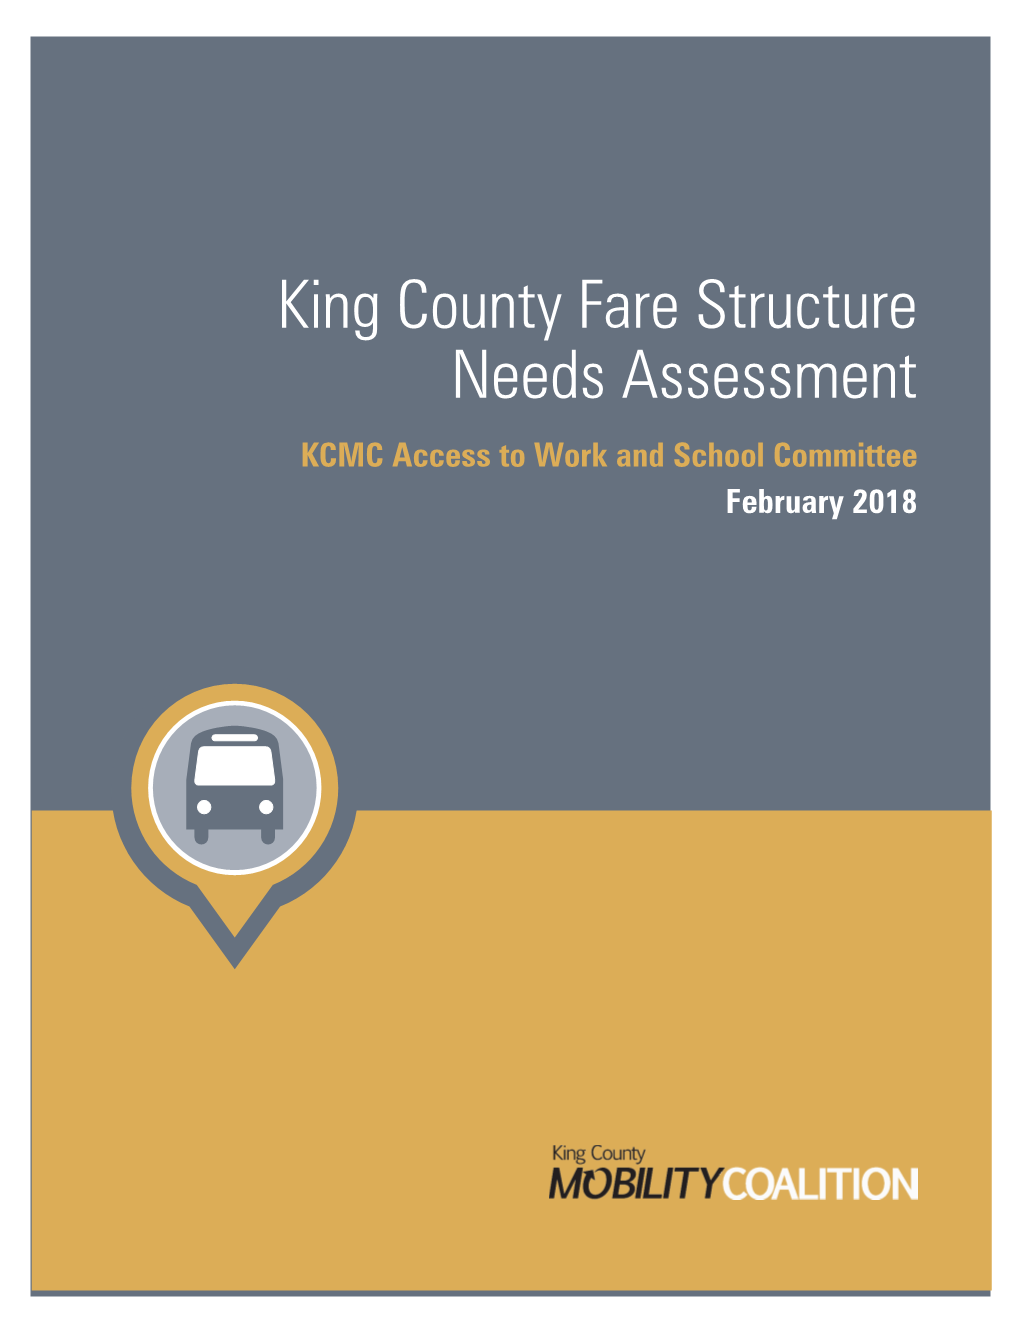 King County Fare Structure Needs Assessment KCMC Access to Work and School Committee February 2018